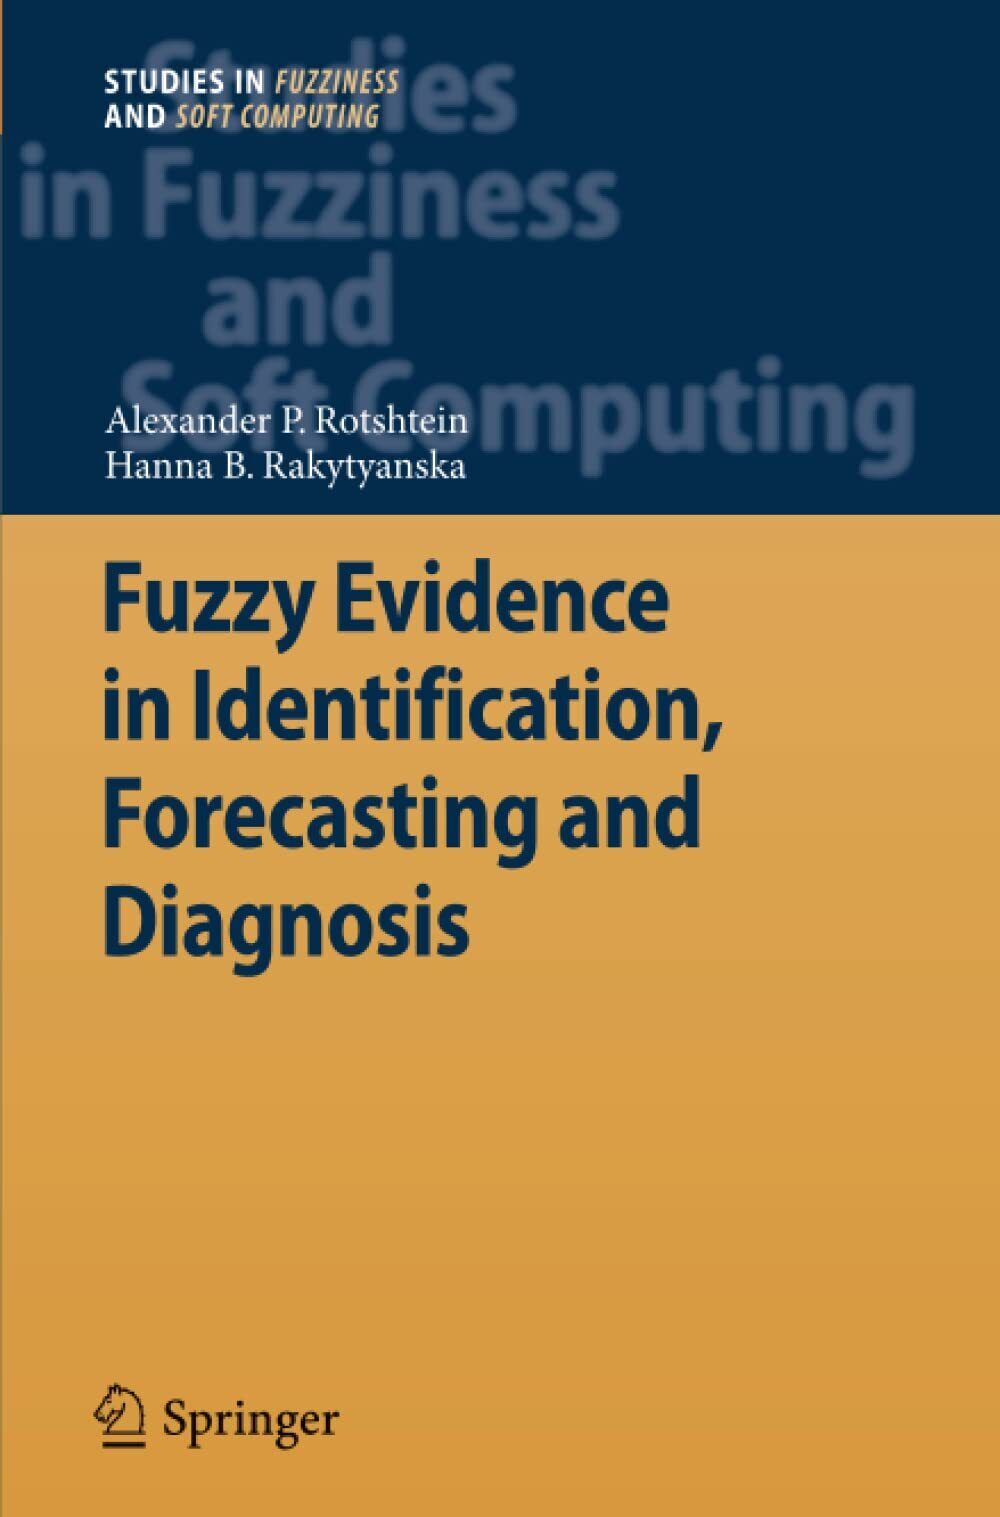 Fuzzy Evidence in Identification, Forecasting and Diagnosis - Springer, 2014